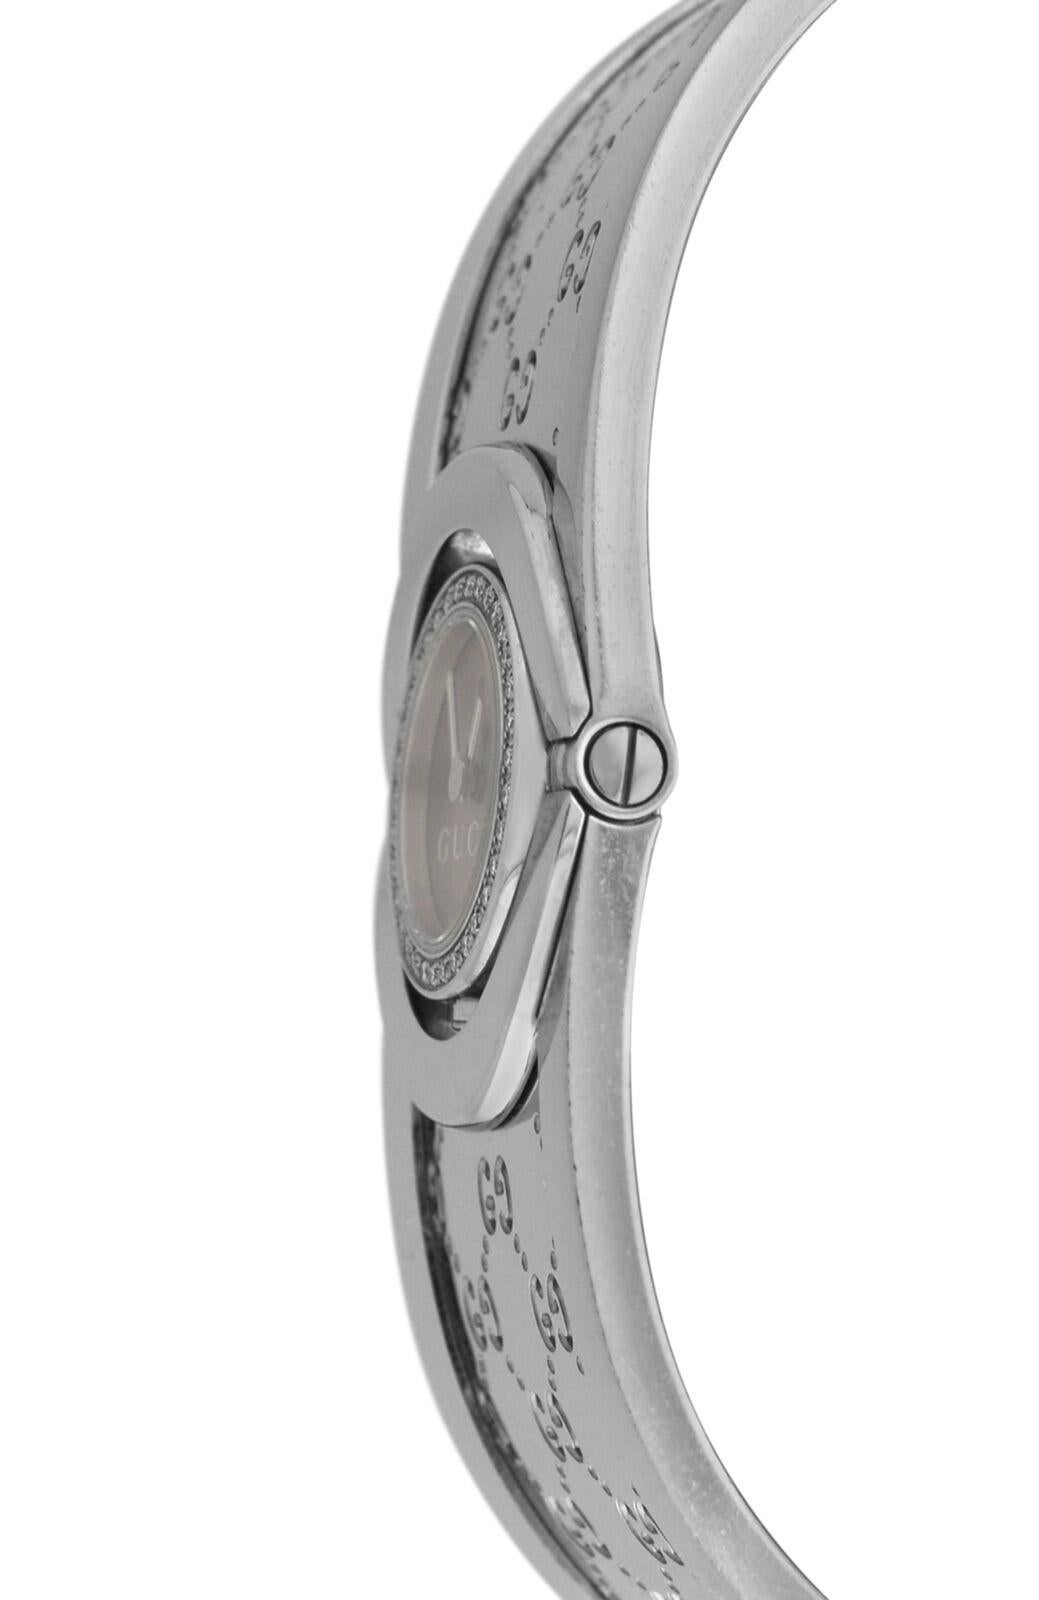 Brand	Gucci
Model	Twirl 112
Gender	Ladies
Condition	Pre owned
Movement	Swiss Quartz
Case Material	Stainless Steel
Bracelet / Strap Material	
Stainless Steel

Clasp / Buckle Material	
Stainless Steel	
Clasp Type	Jewelry clasp
Bracelet / Strap